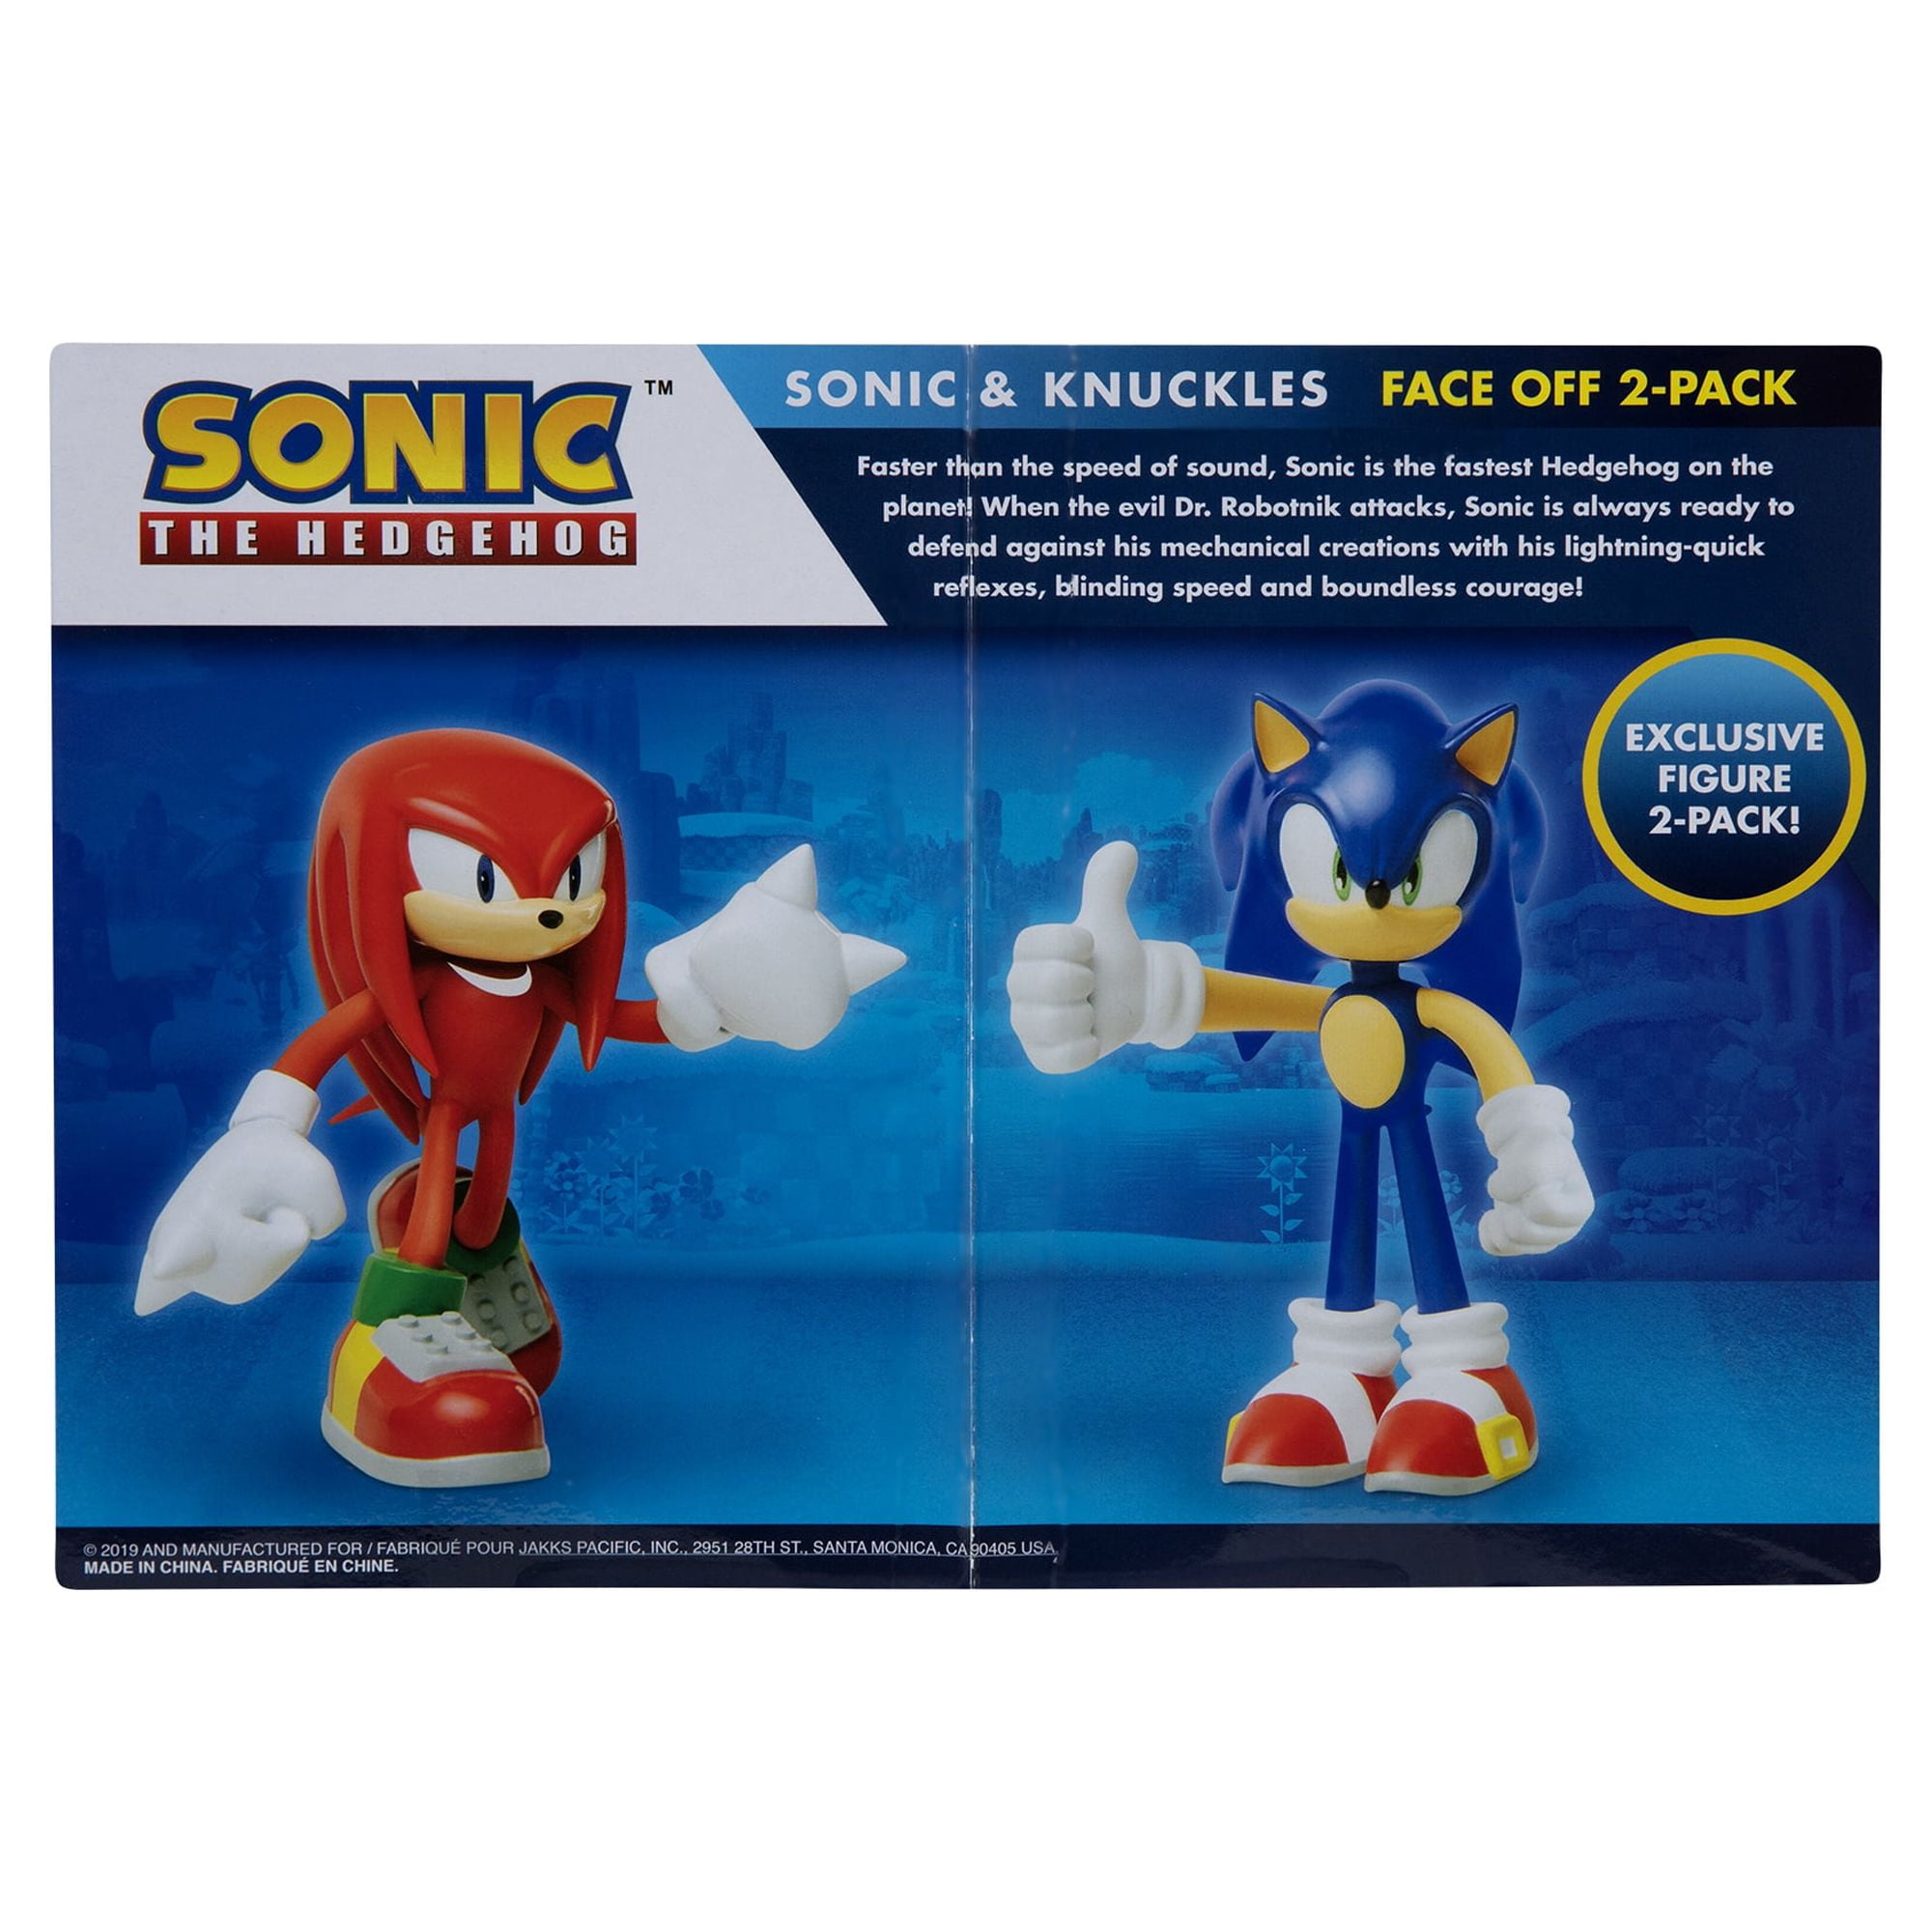 Sonic the Hedgehog 4 JAKKS Gold Collector Action Figure - Metal Sonic with  Super Ring Item Box with 11 Points of Articulation